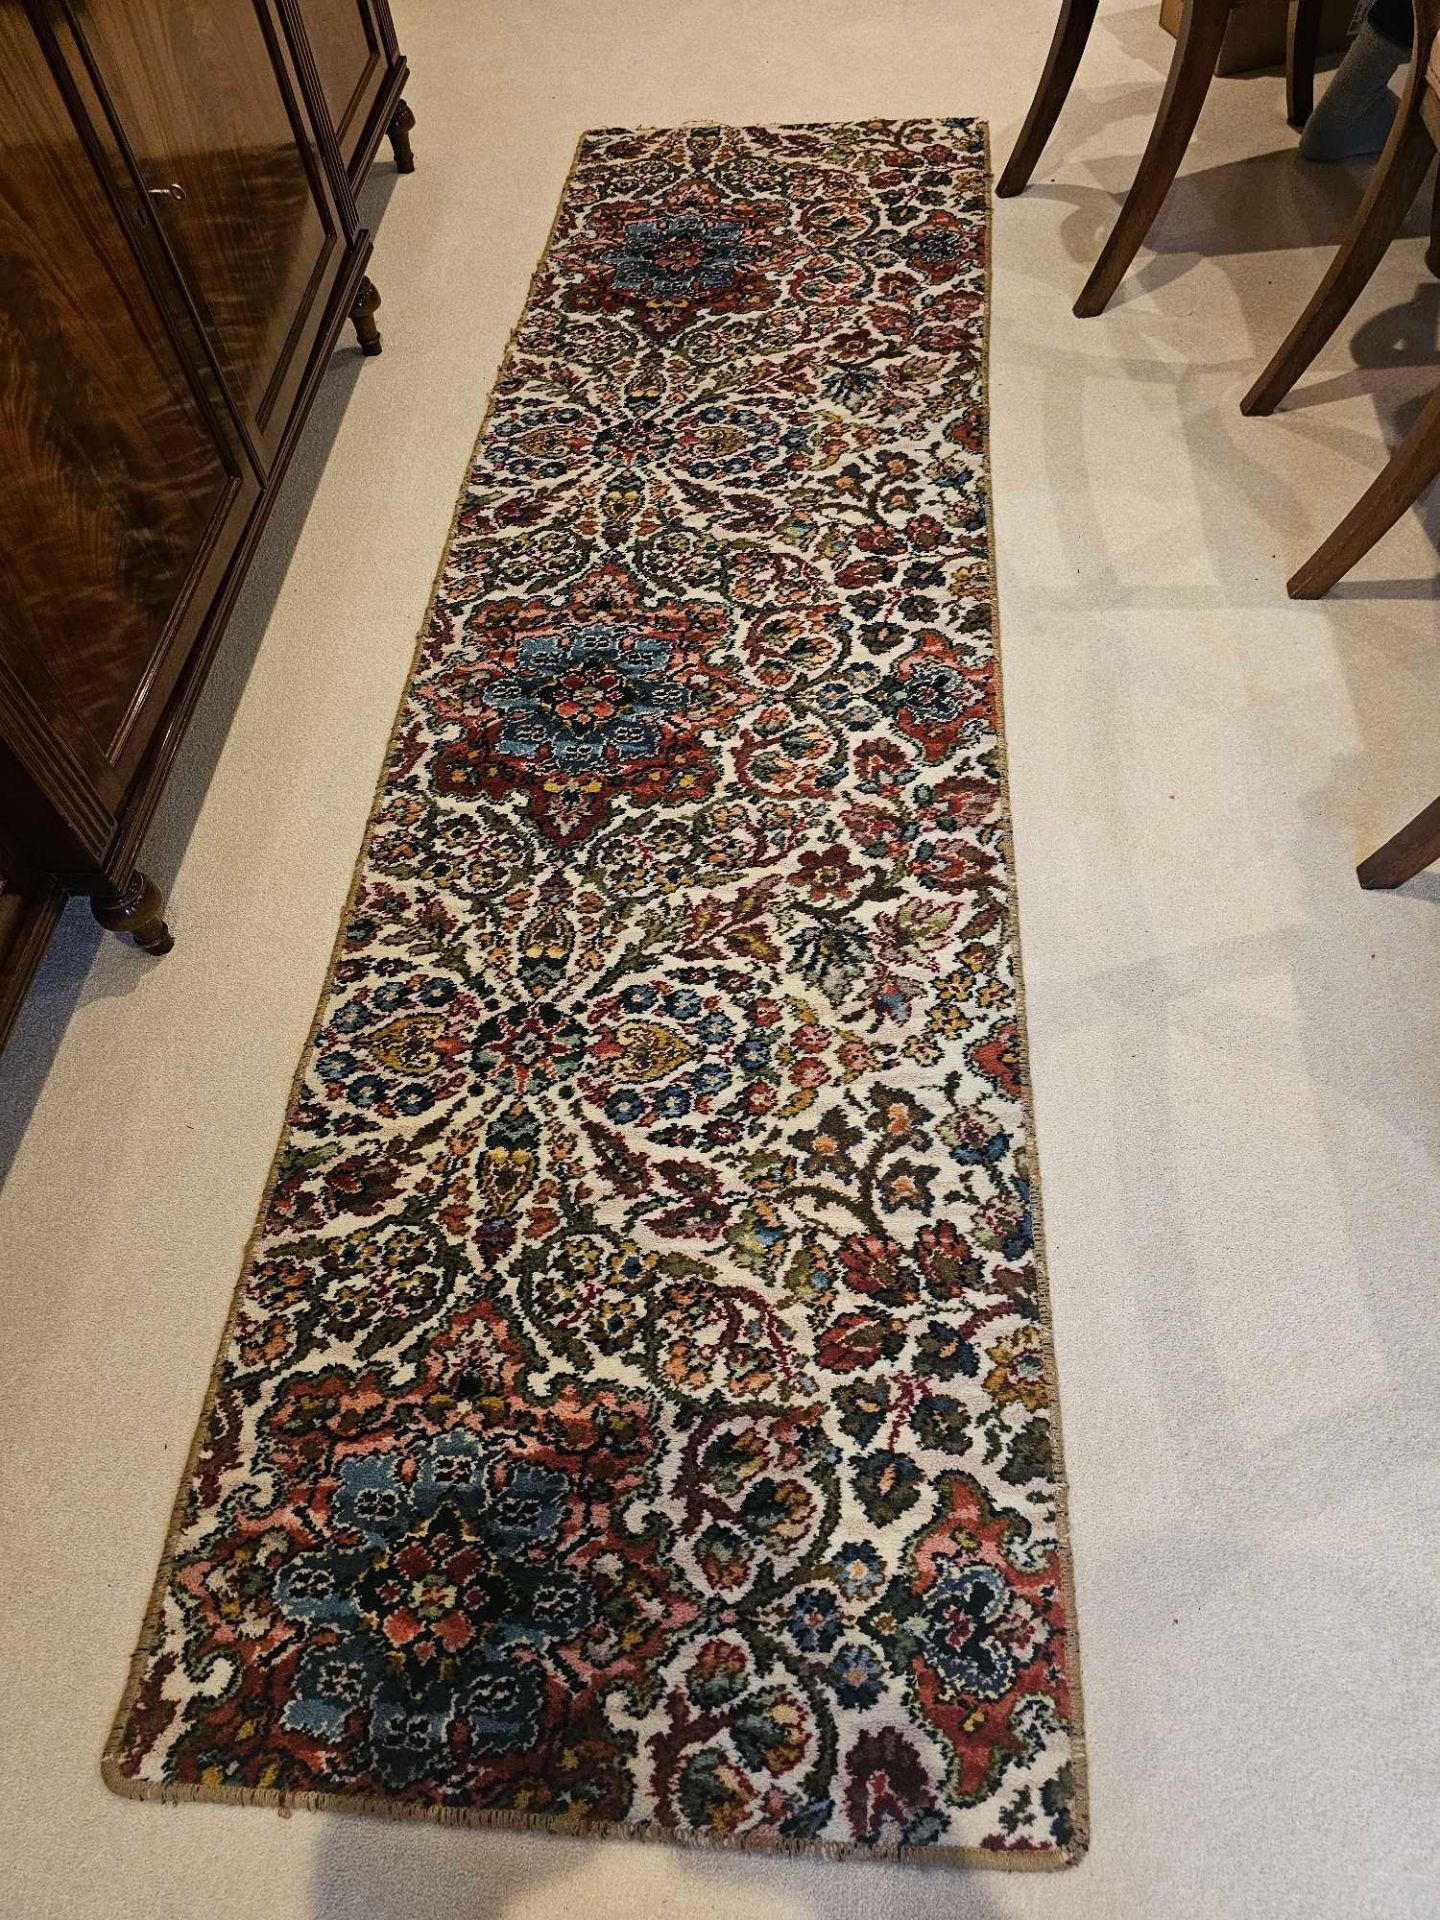 A Wool Floral Runner 66 X 232cm - Image 2 of 5